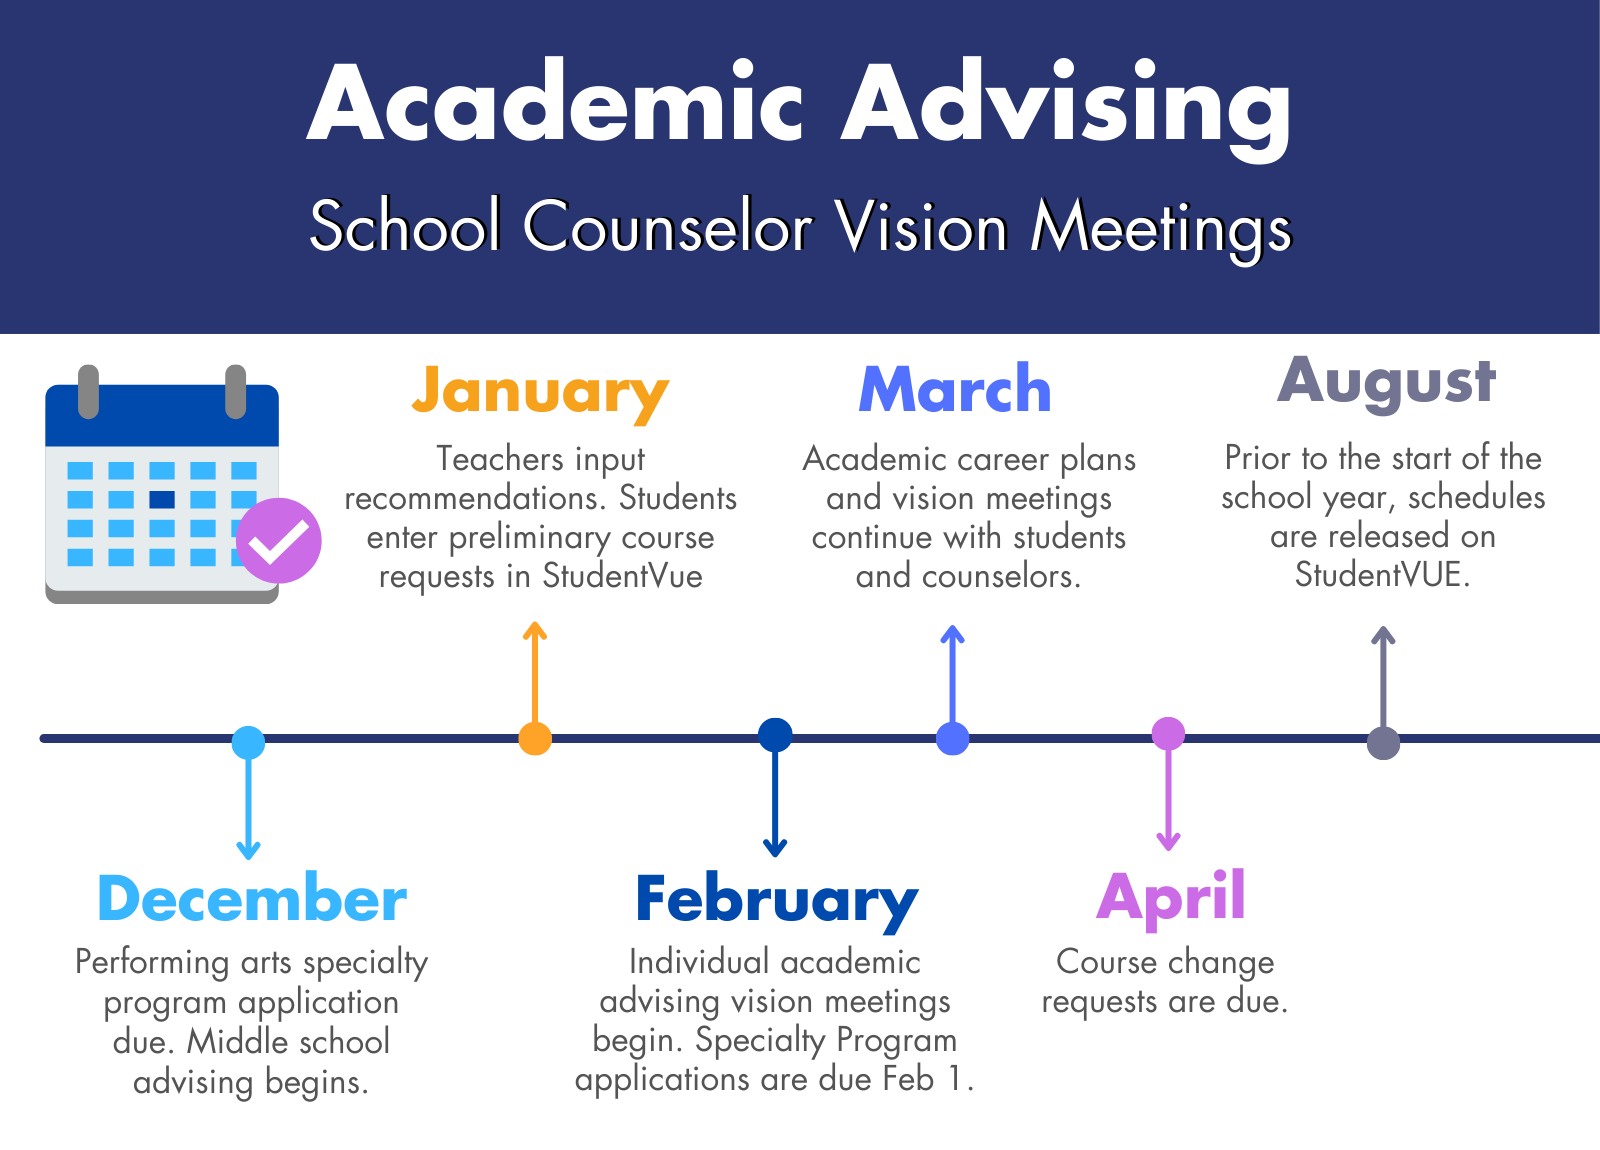 Graphic of Academic Advising Timeline showing school counselor vision meetings from December through August